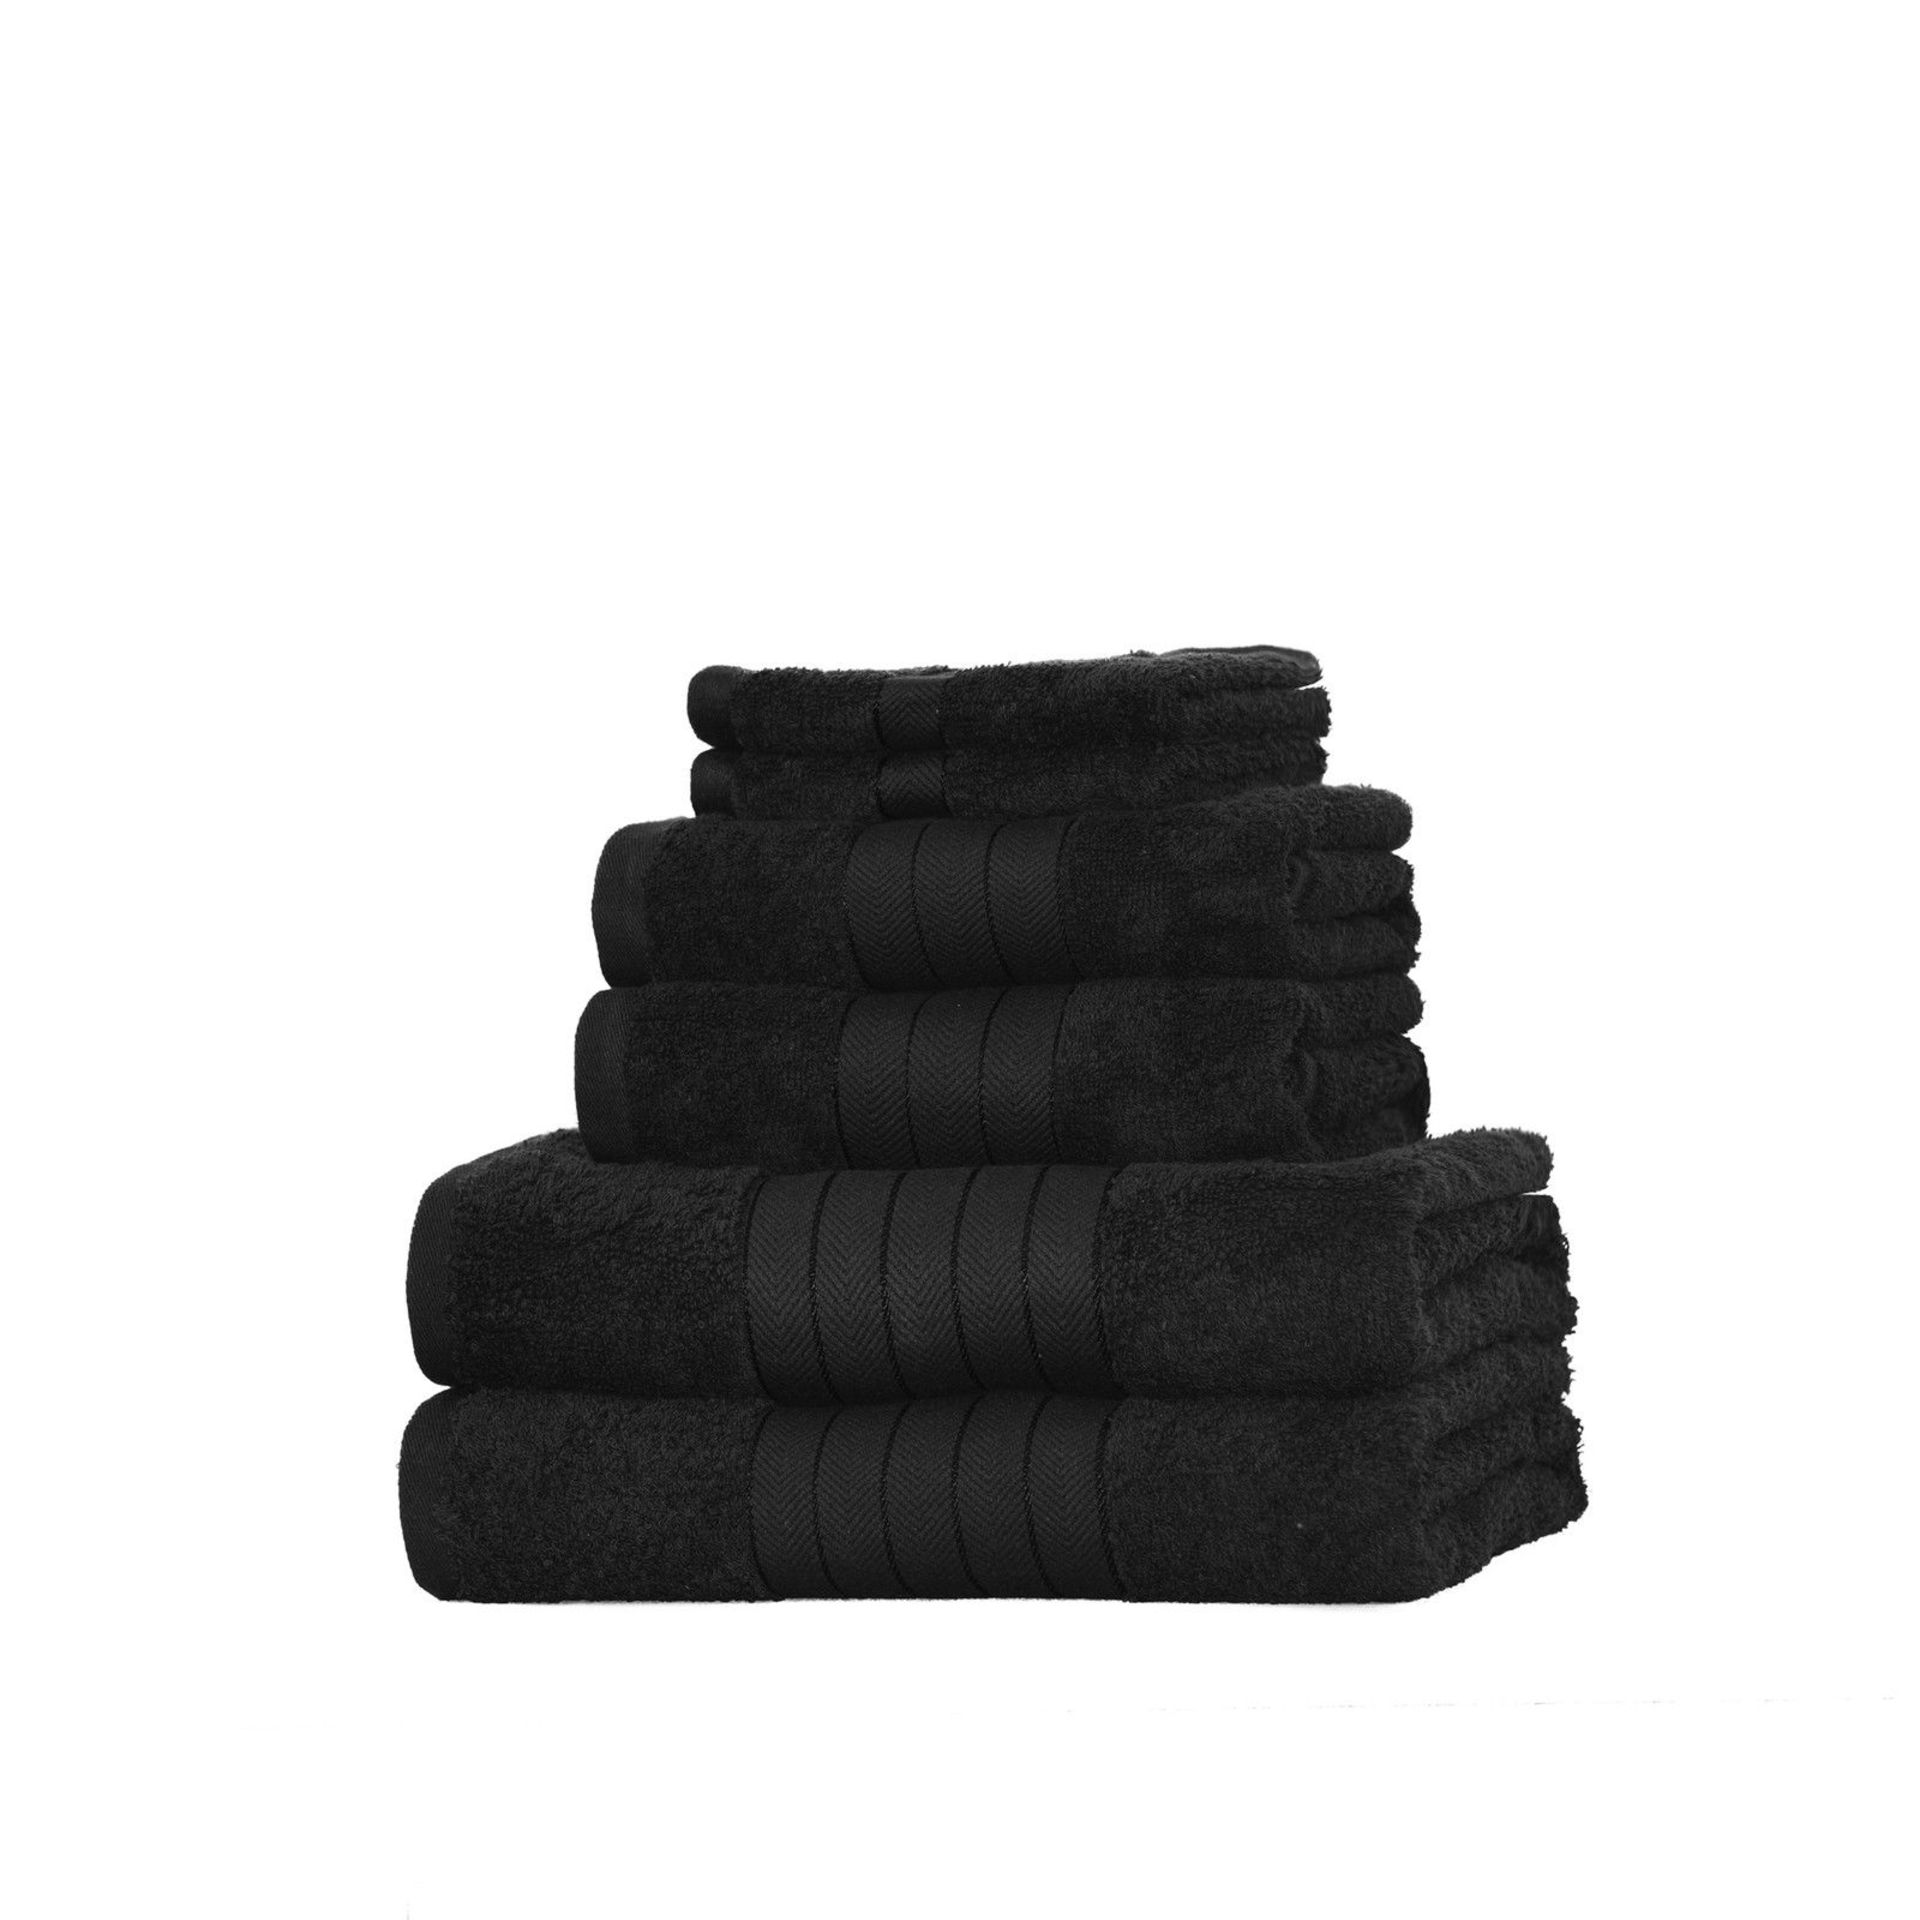 V *TRADE QTY* Brand New Black 6 Piece Towel Bale Set With 2 Face Towels - 2 Hand Towels - 1 Bath